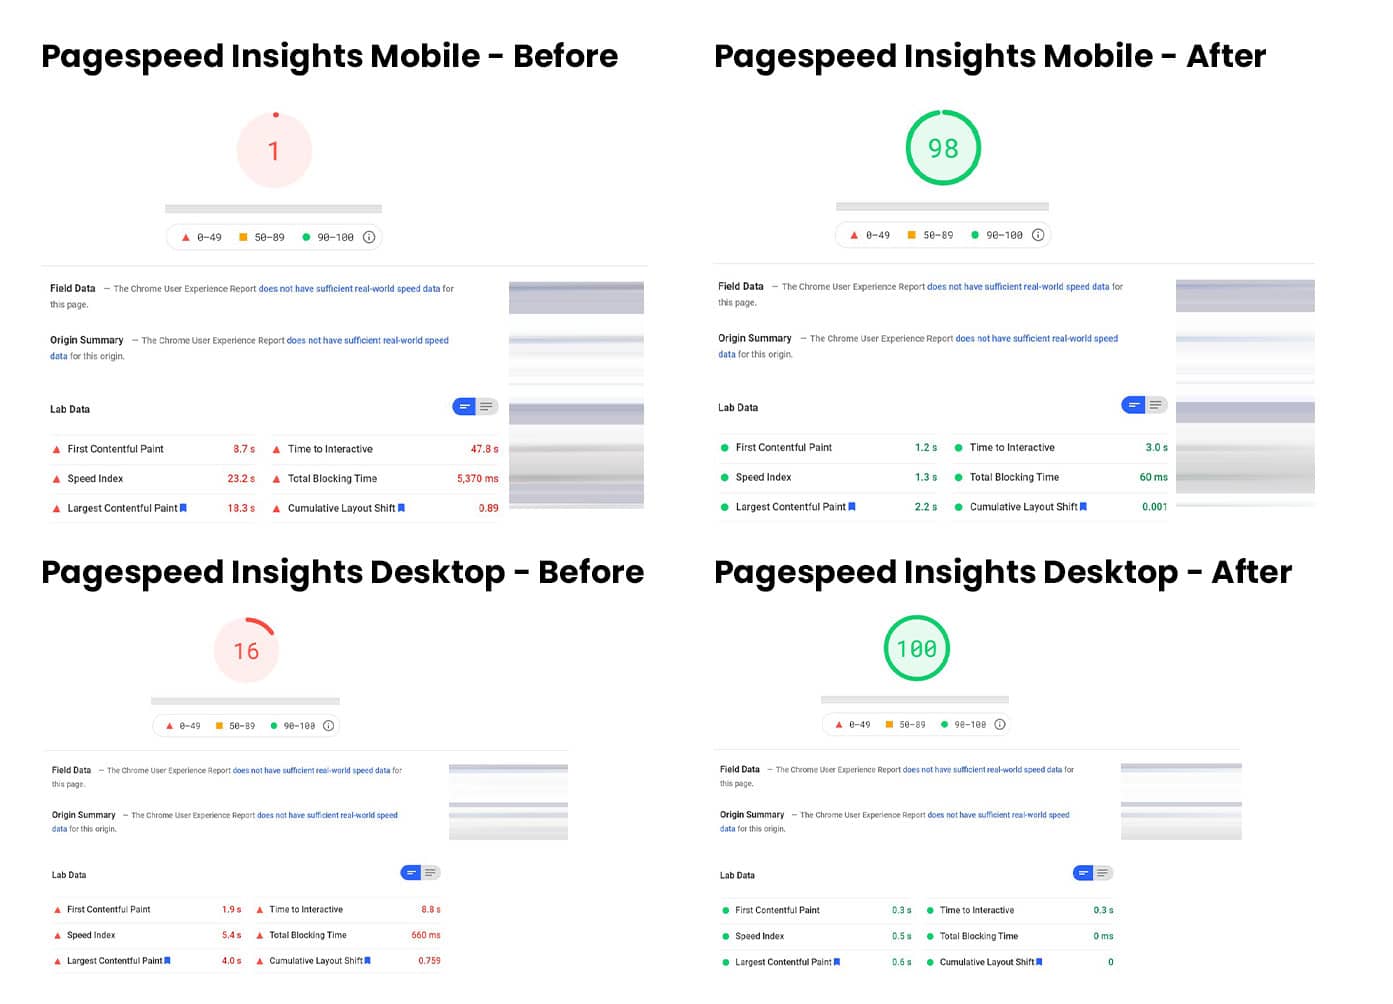 Pagespeed insights results showing mobile score at 1 before and 98 after site speed optimization. Desktop was at 16 before and now sitting at 100.